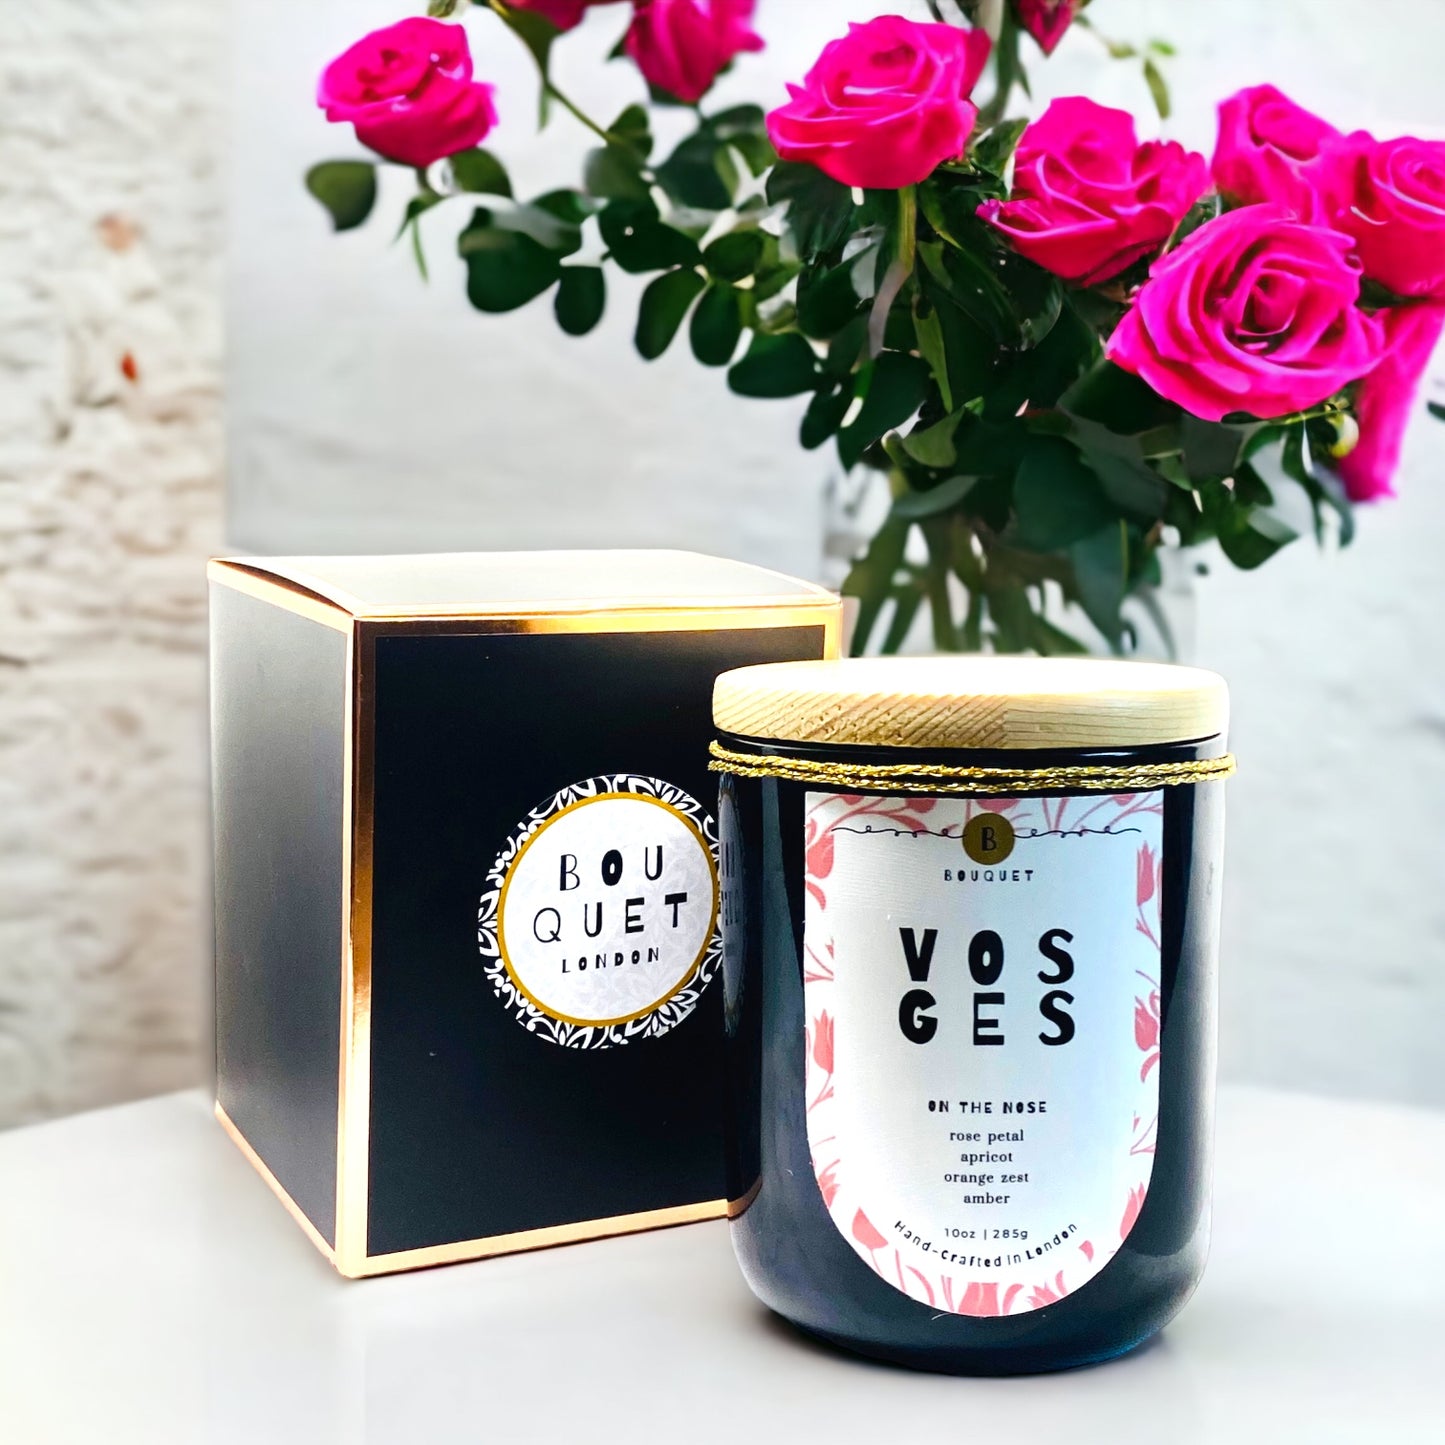 The Vosges Candle